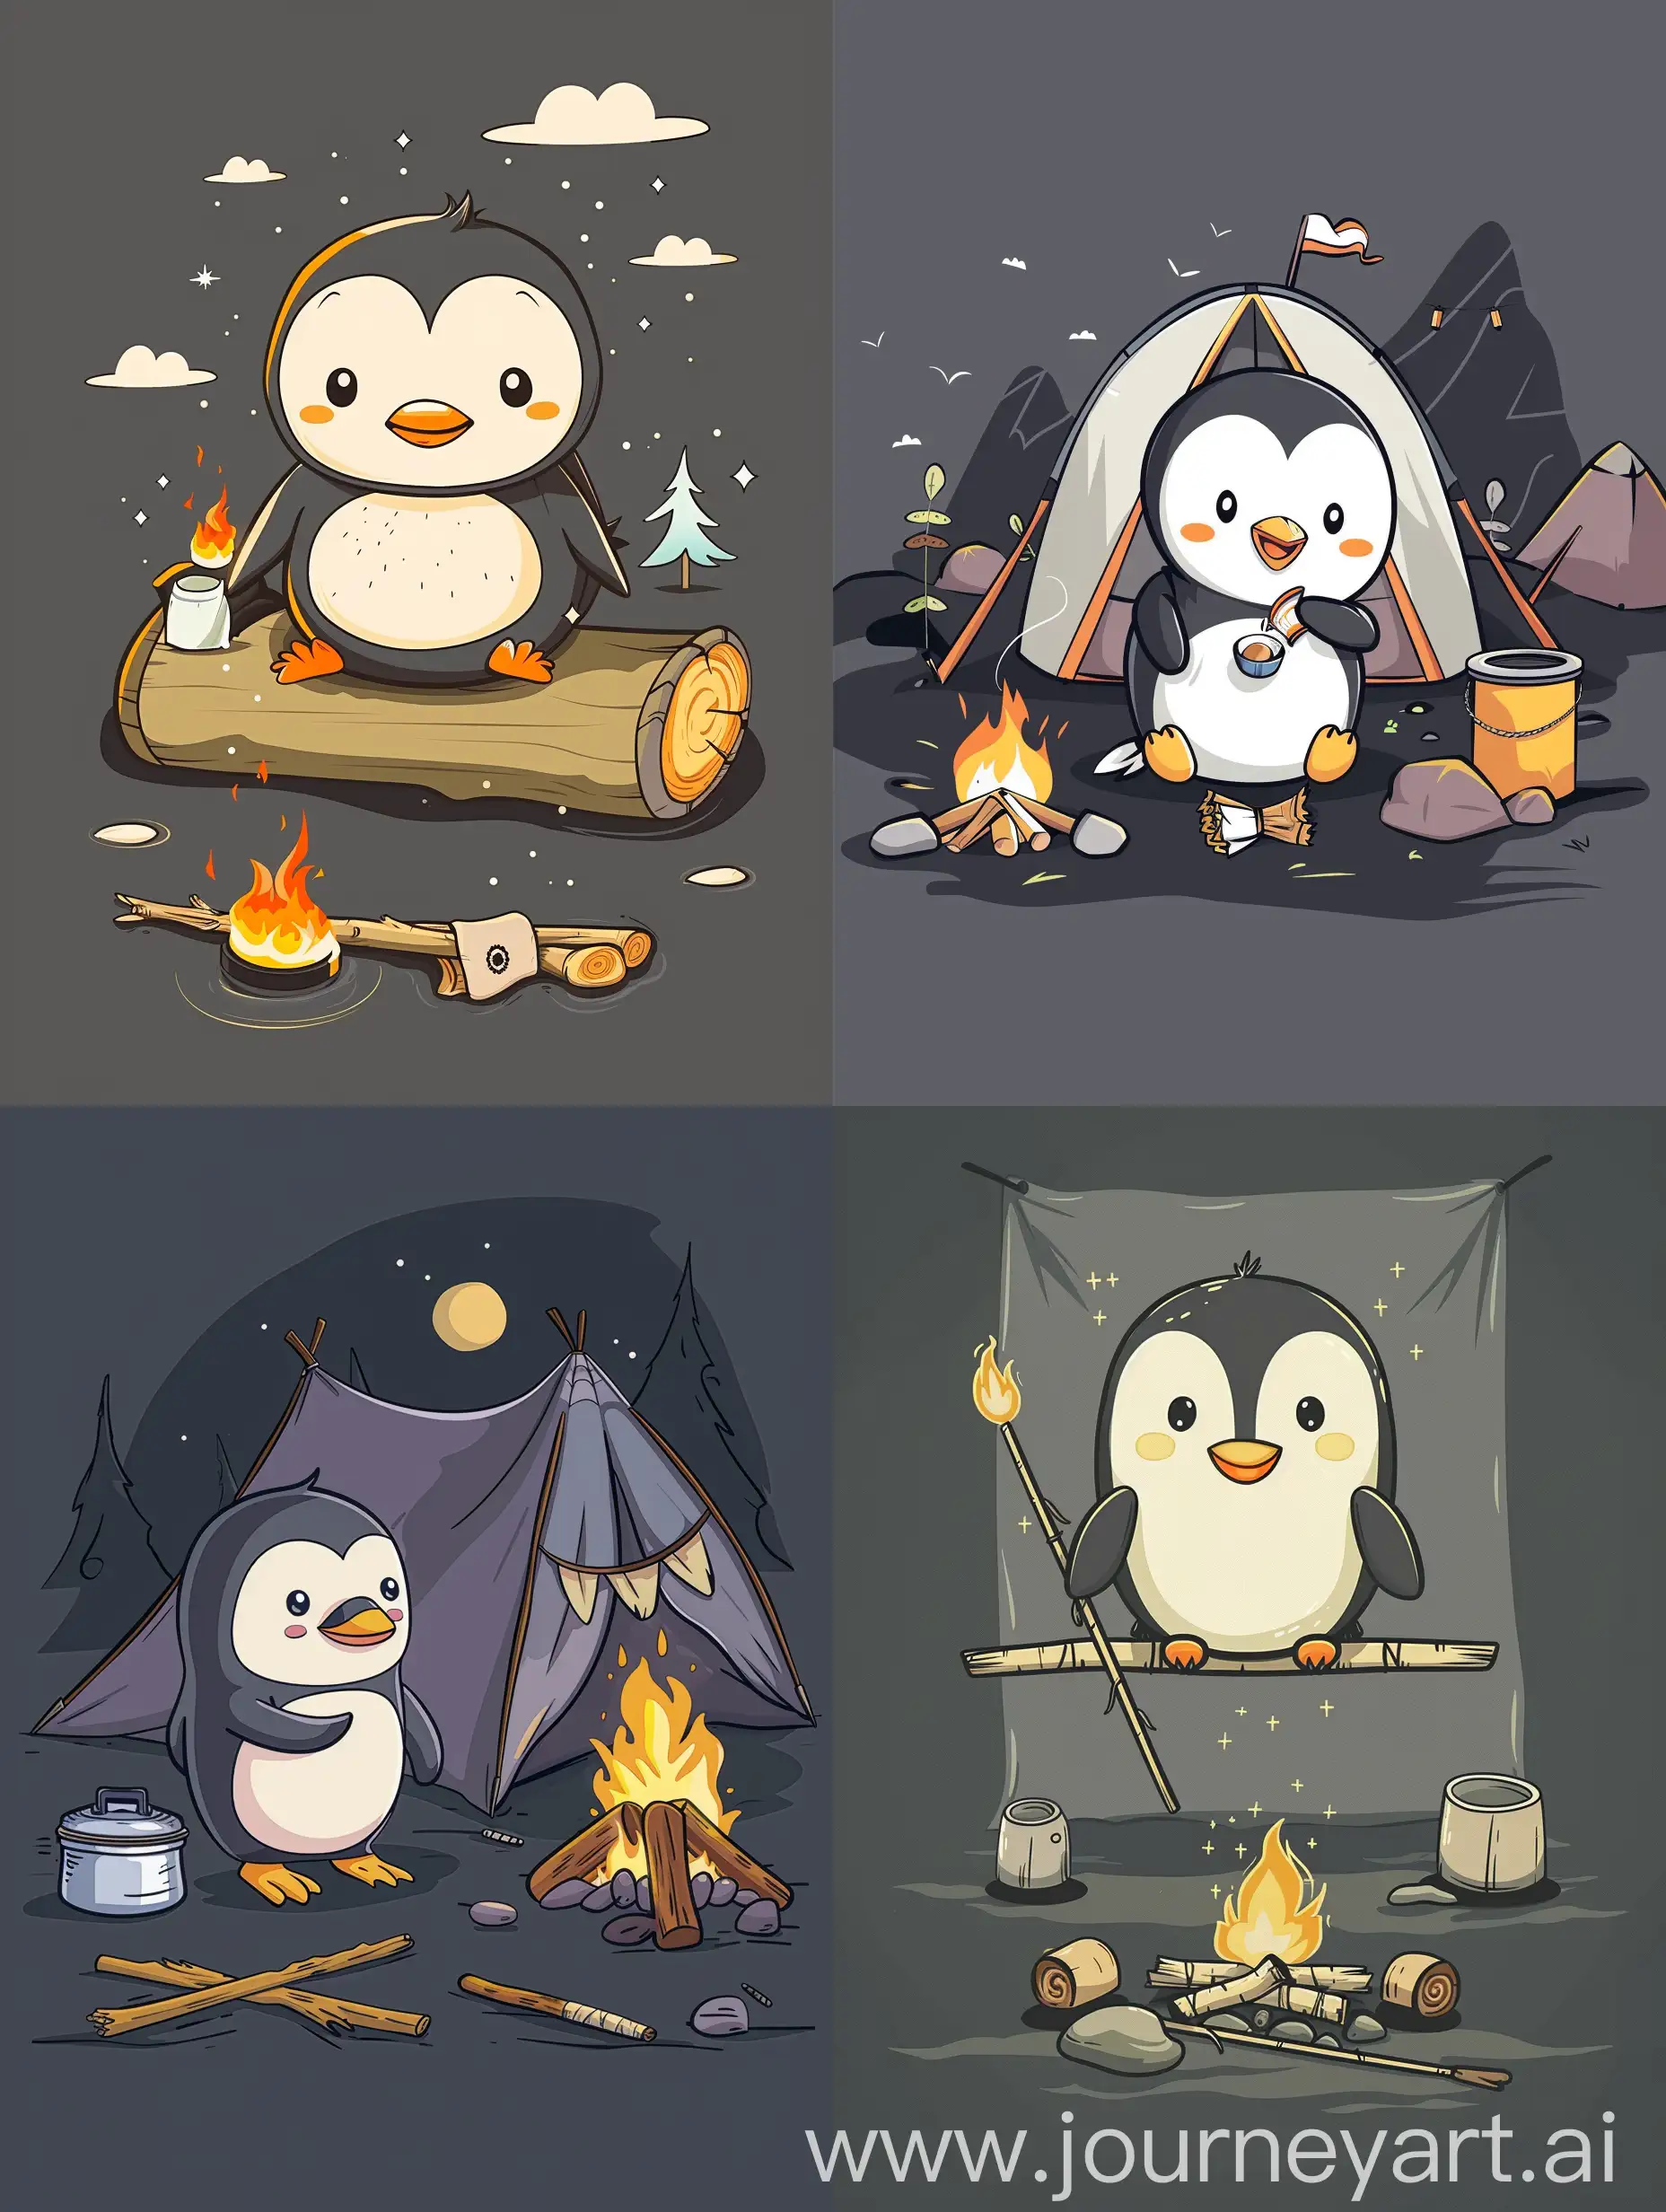 Chibi-Cute-Penguin-Camping-Adventure-on-Solid-Dark-Grey-Background